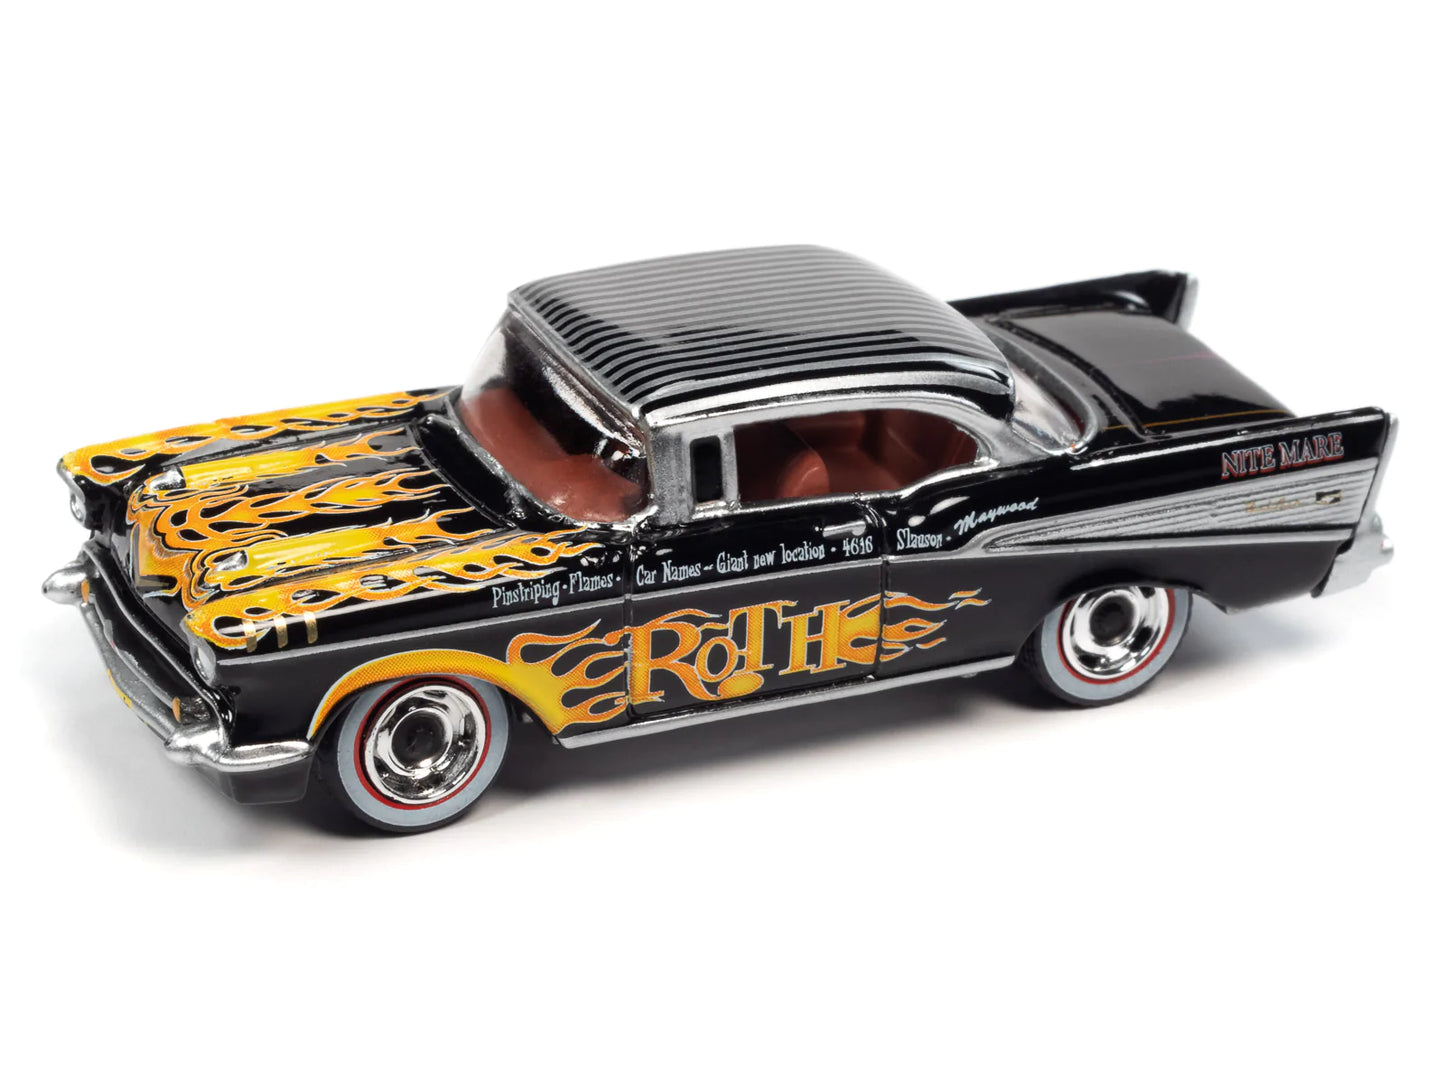 Johnny Lightning Collectors Club Ed Big Daddy Roth 1957 Chevy Bel Air Nite Mare 1:64